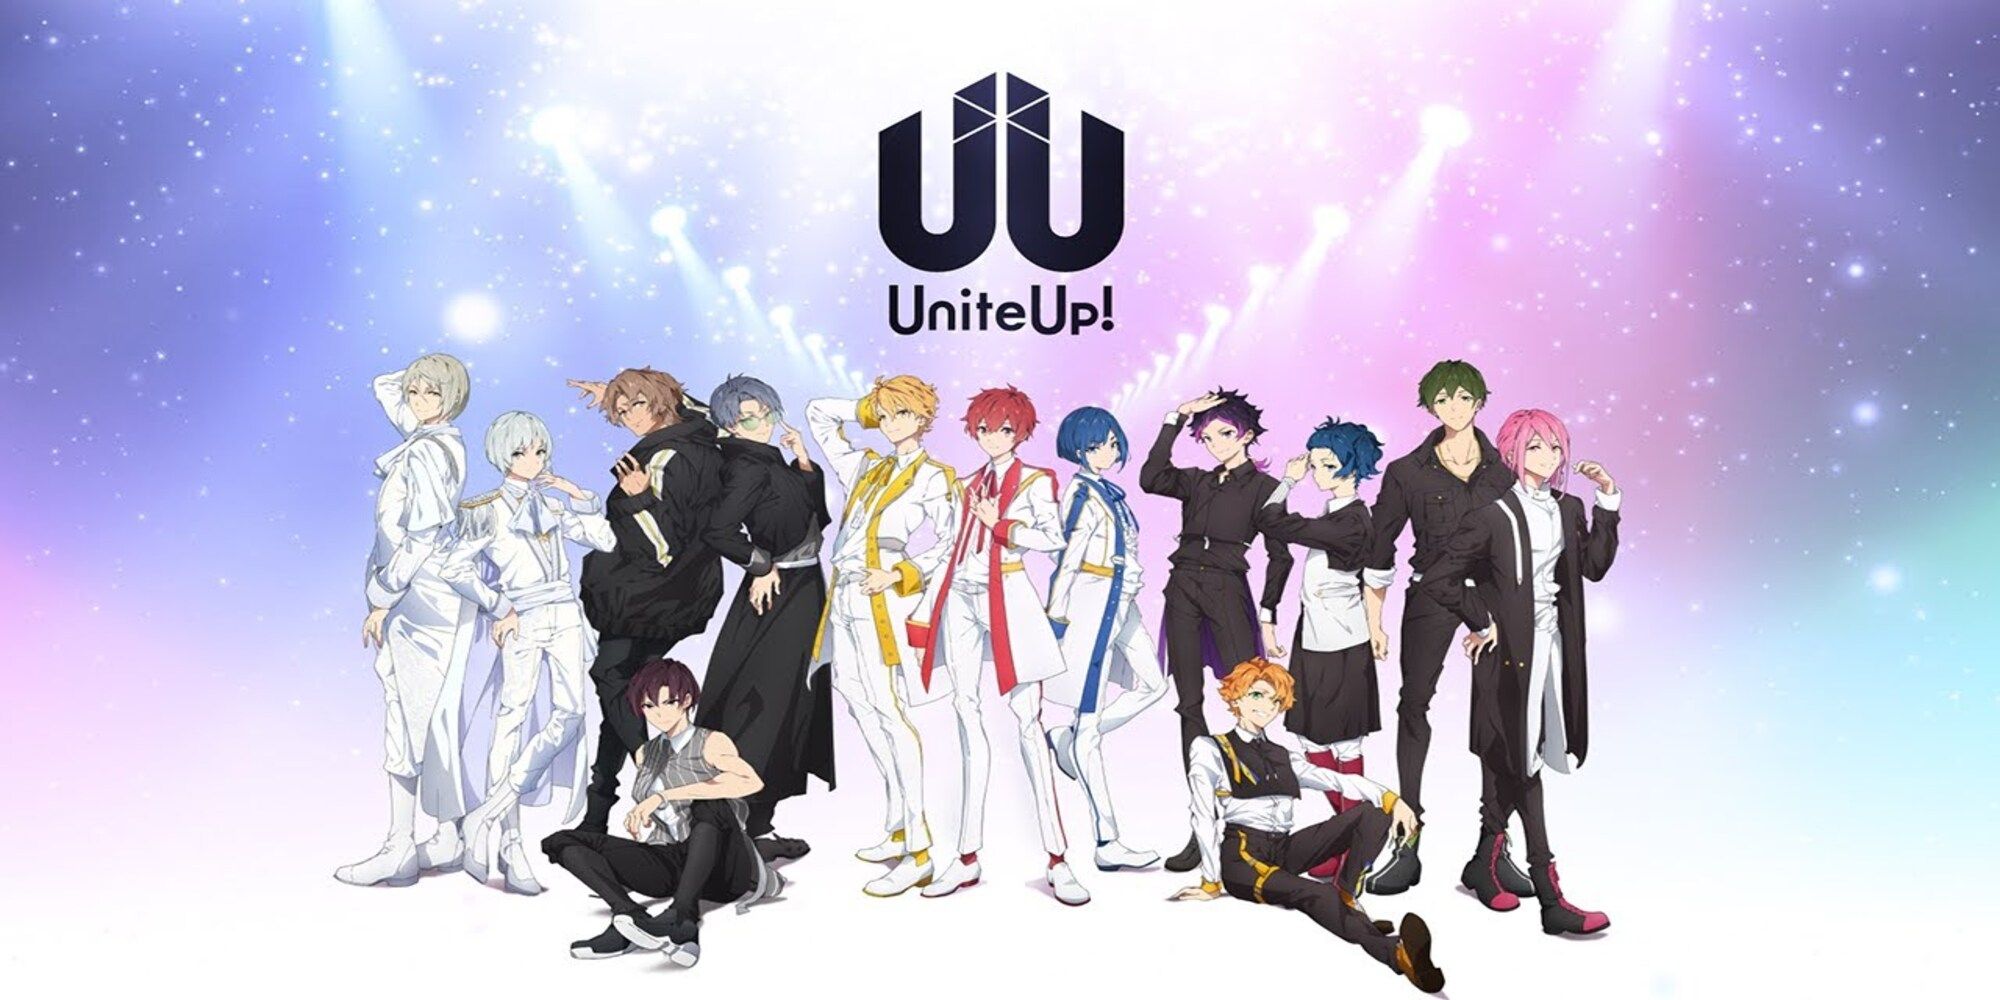 Four idol groups from UniteUp! anime stand together in front of a galaxy-themed background.